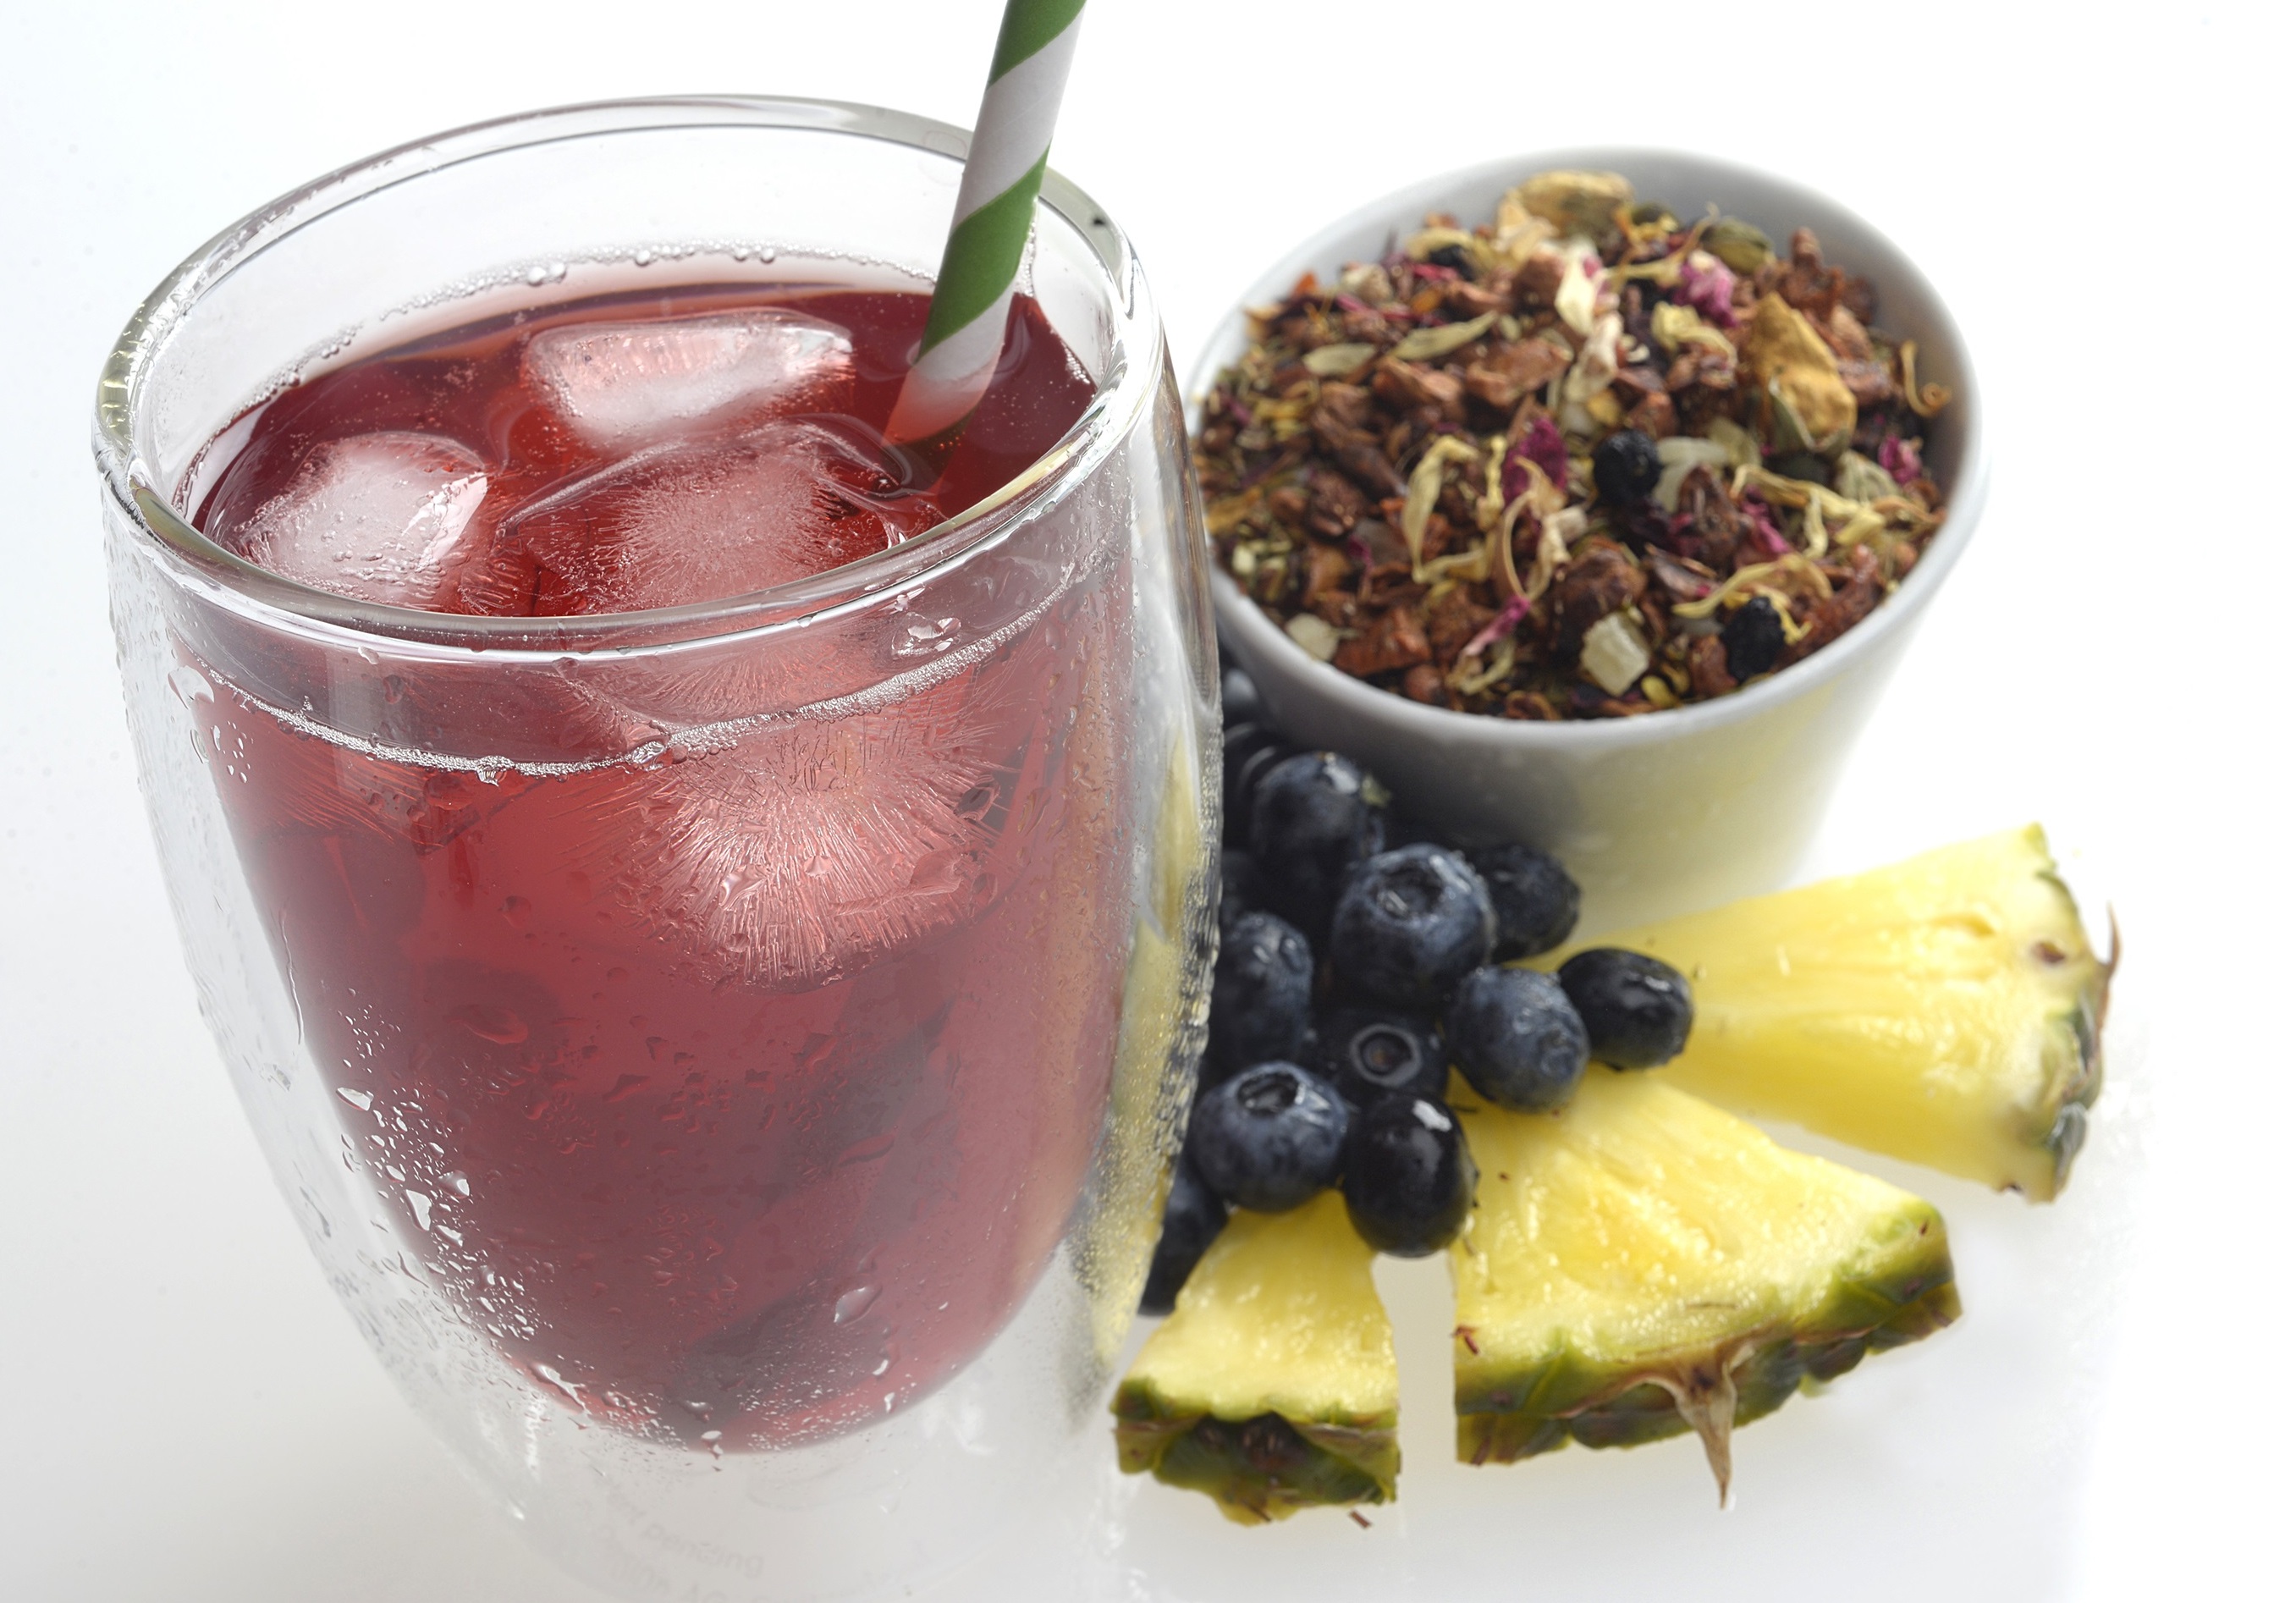 Get Your Free Iced Tea At Teavana June 10 To Celebrate Another Nonsense Holiday